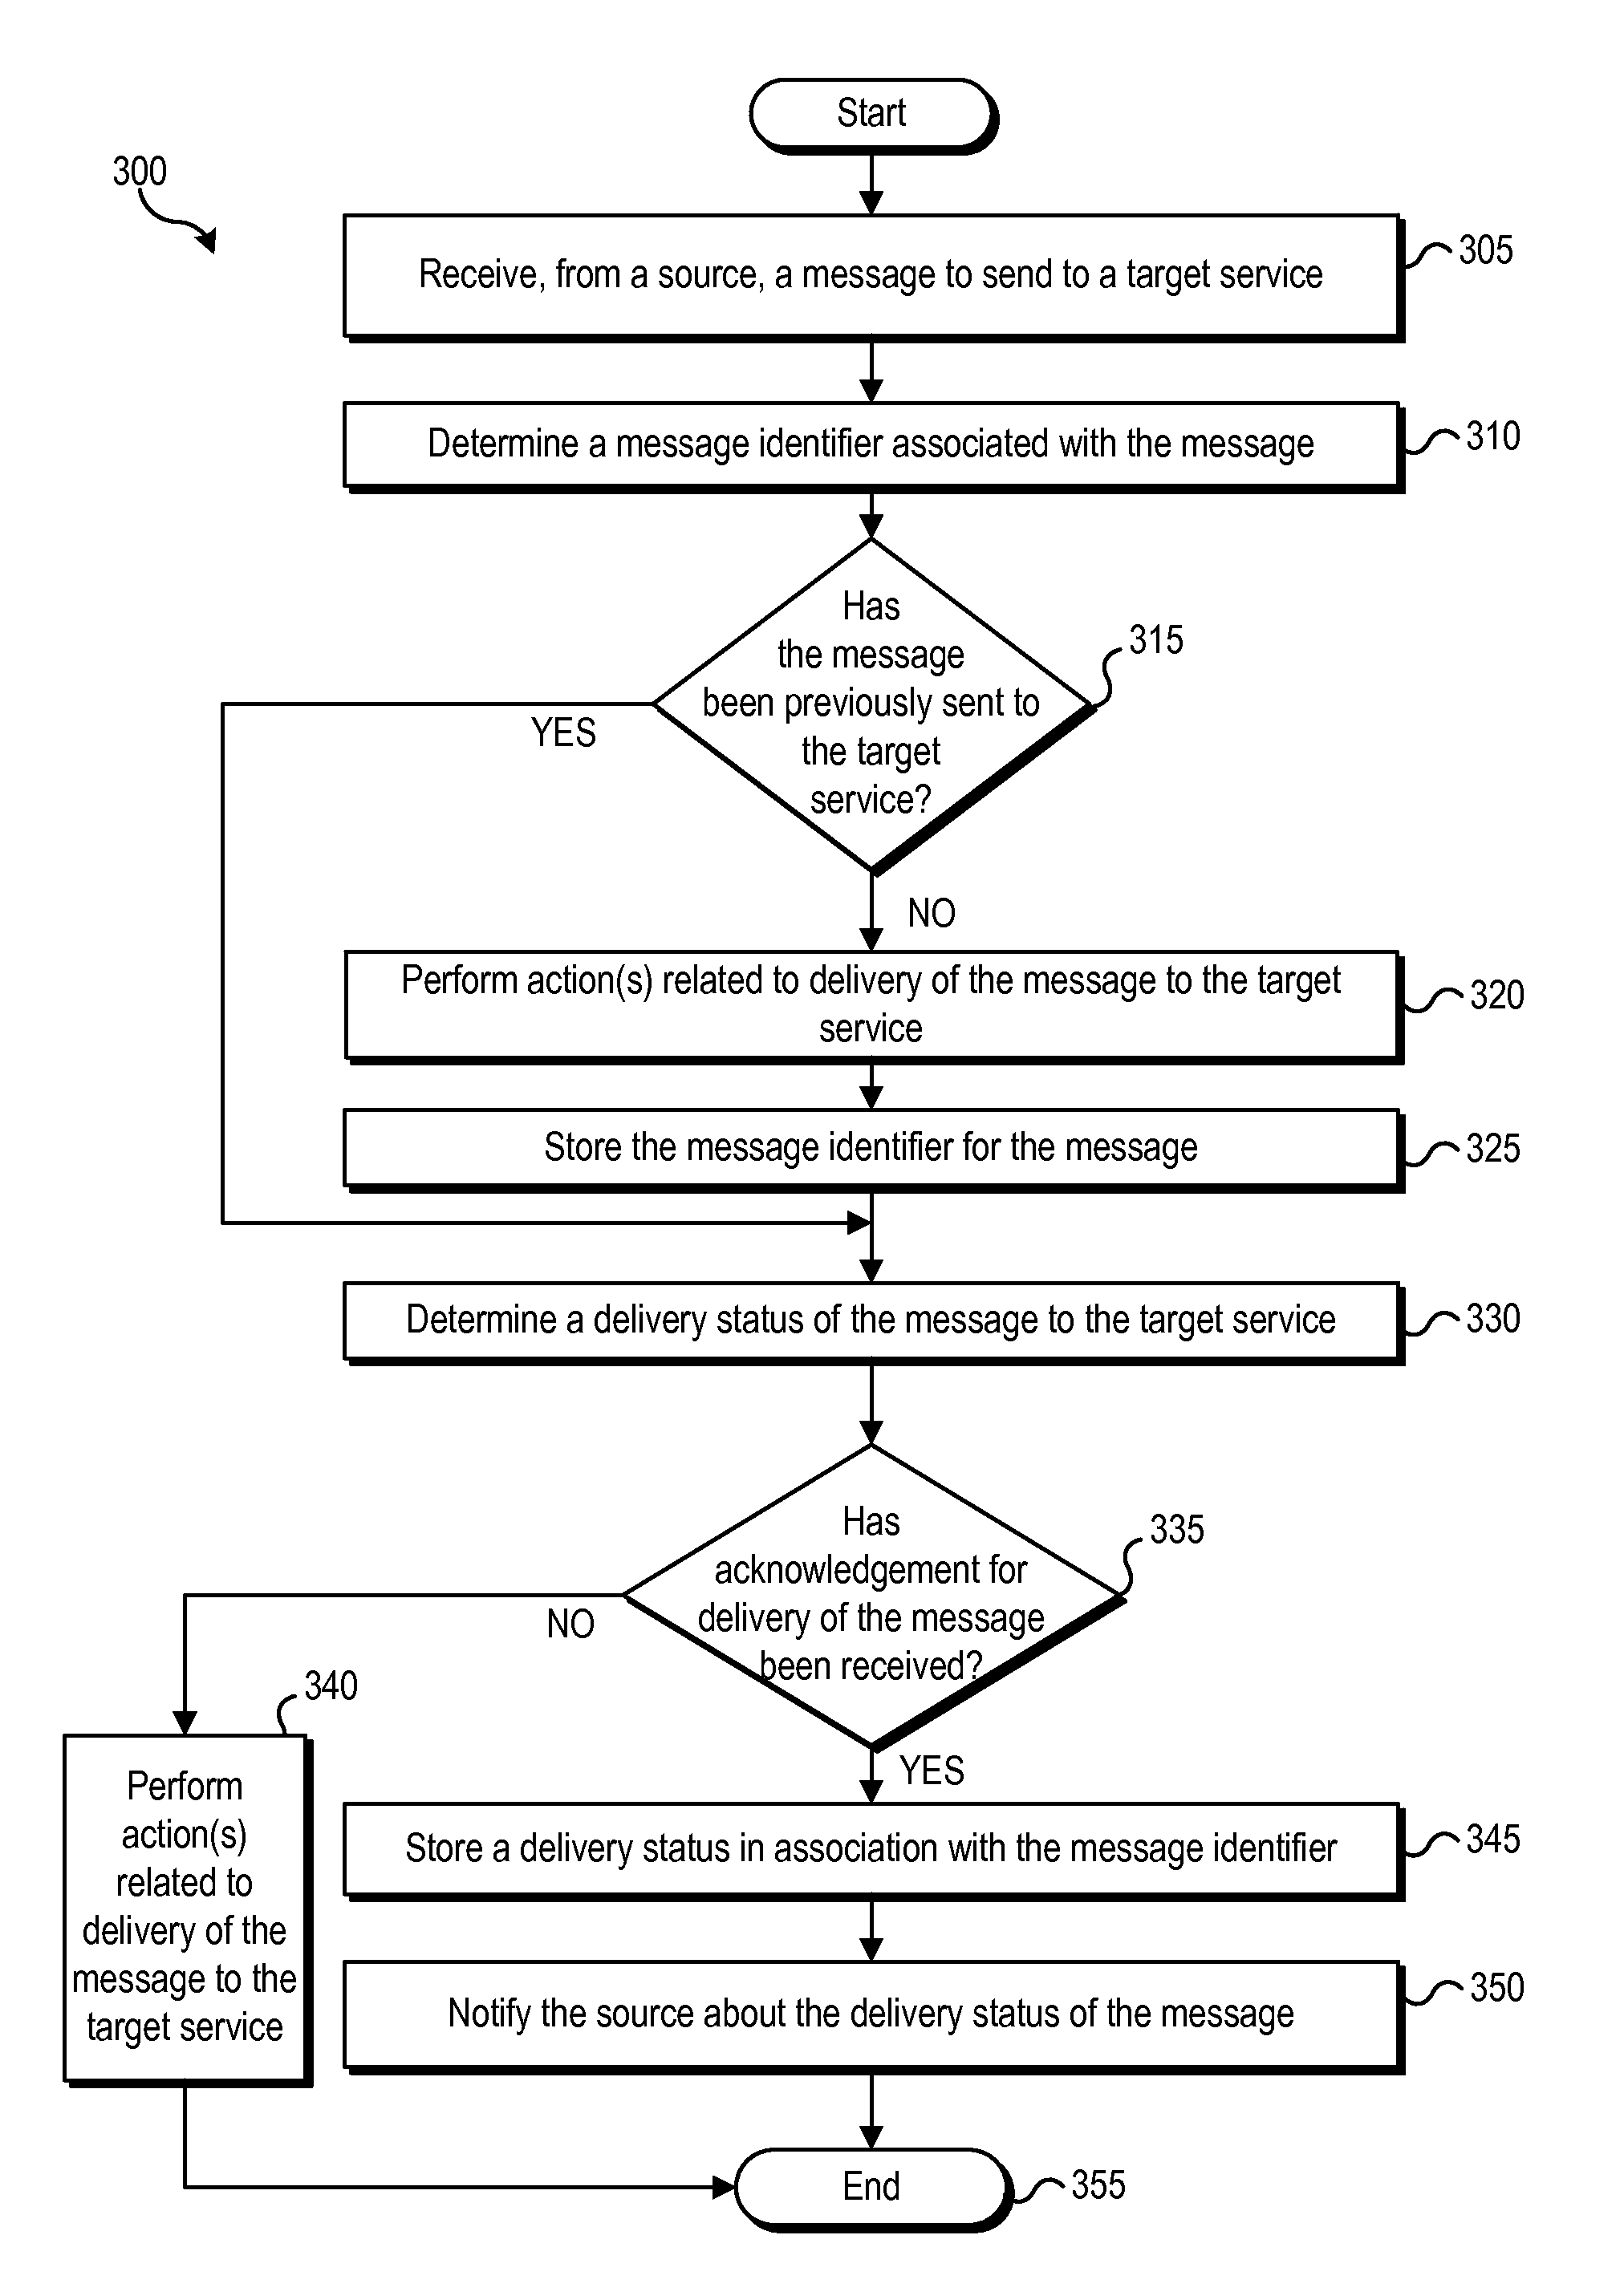 Techniques for reliable messaging for an intermediary in a network communication environment